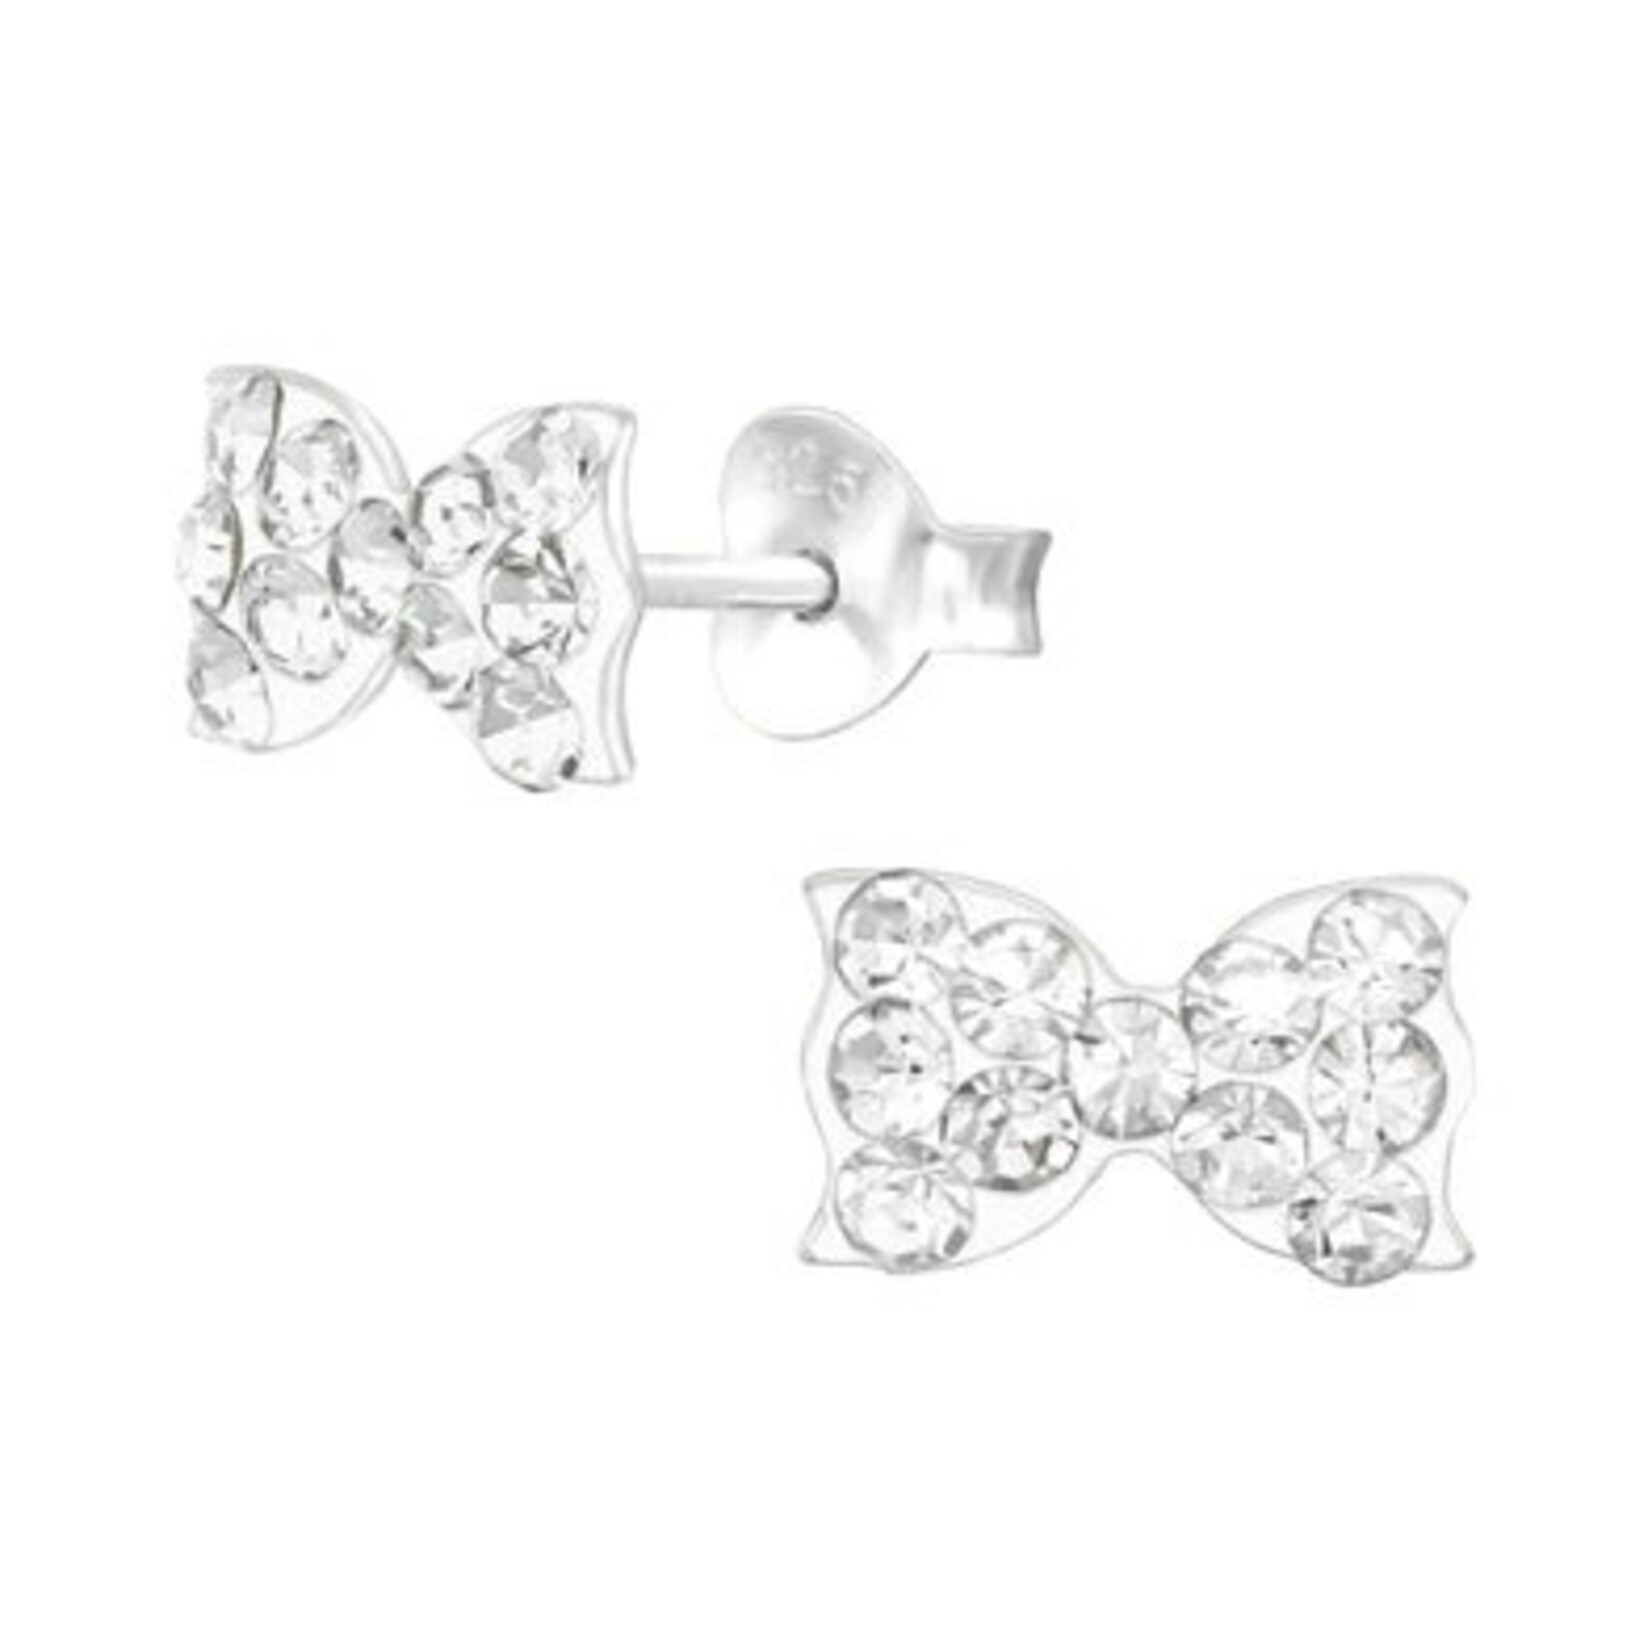 Lily Nily Crystal Bow SS Earrings